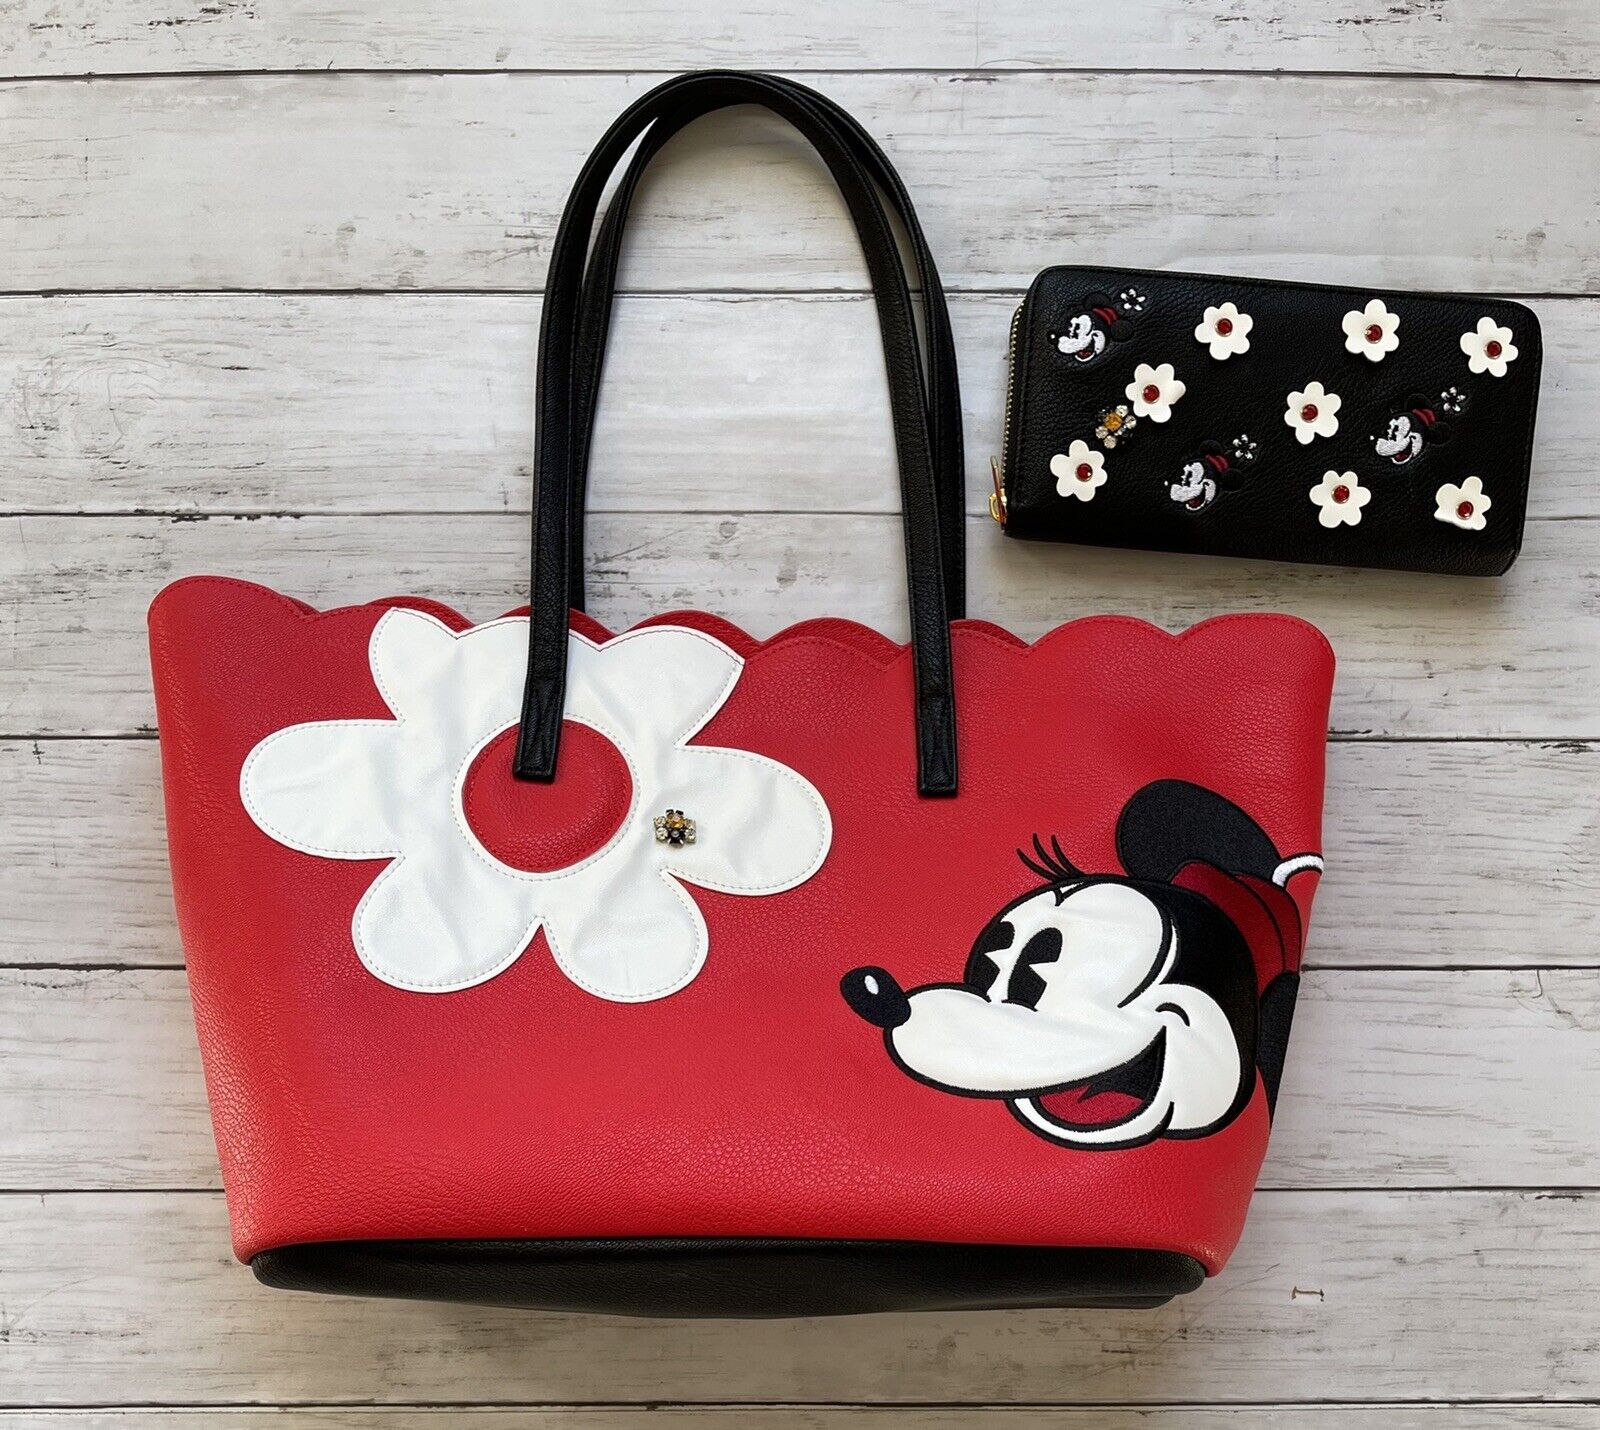 Hobart Pornografie Ale Disney Store Minnie Mouse Red Tote Bag With Black Wallet Girly Flower Nice  Set | eBay